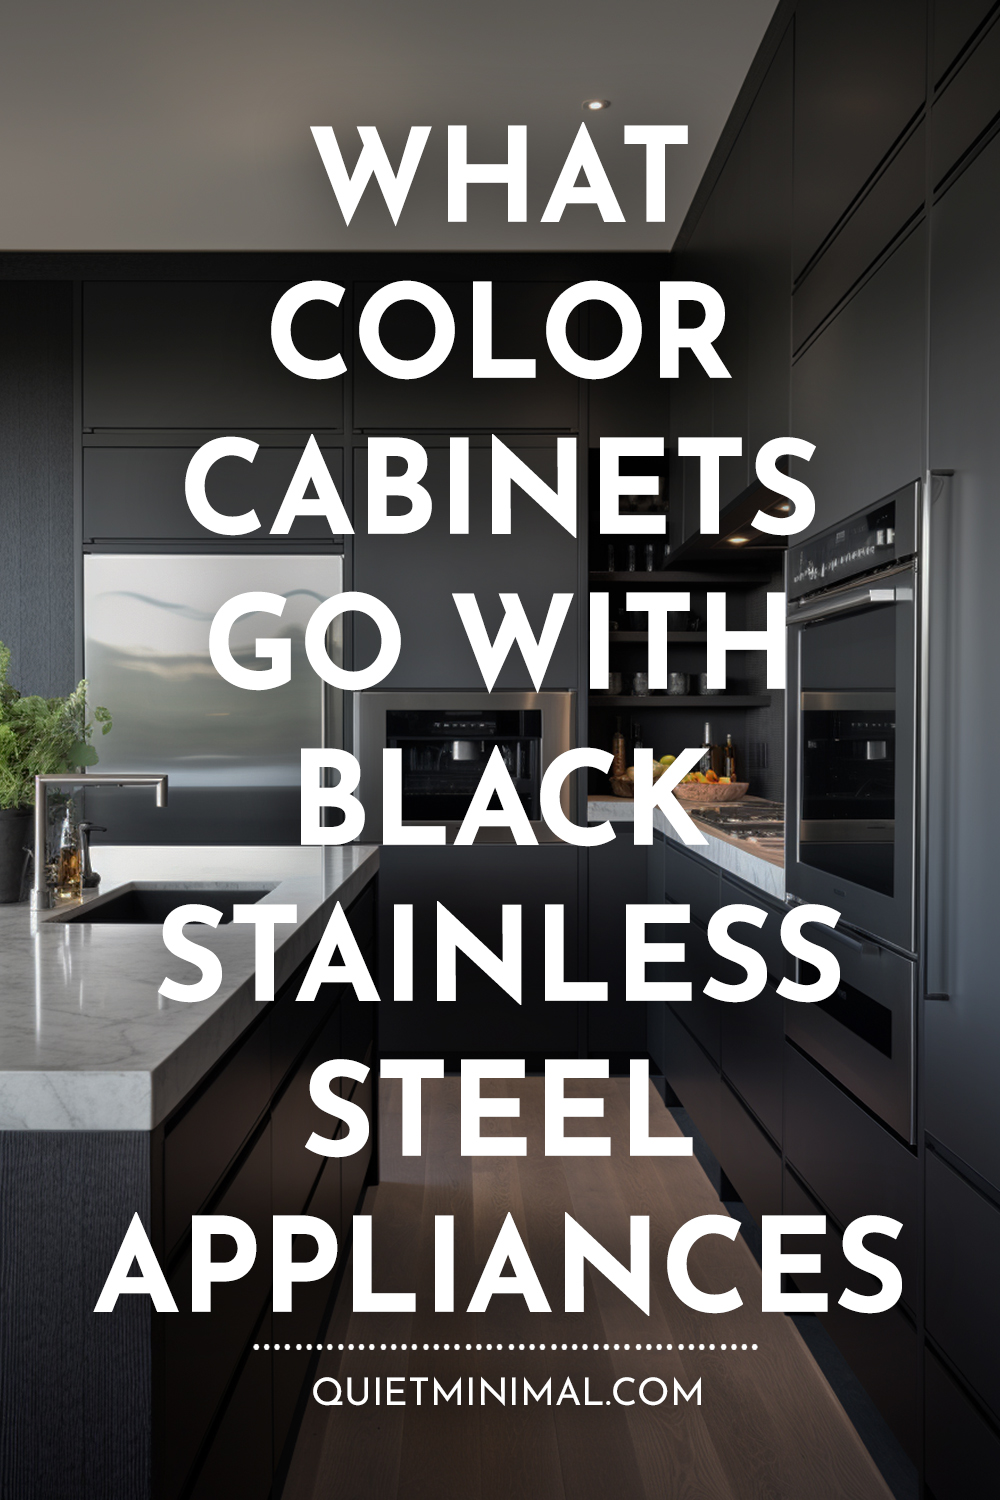 What color cabinets go with black stainless steel appliances?